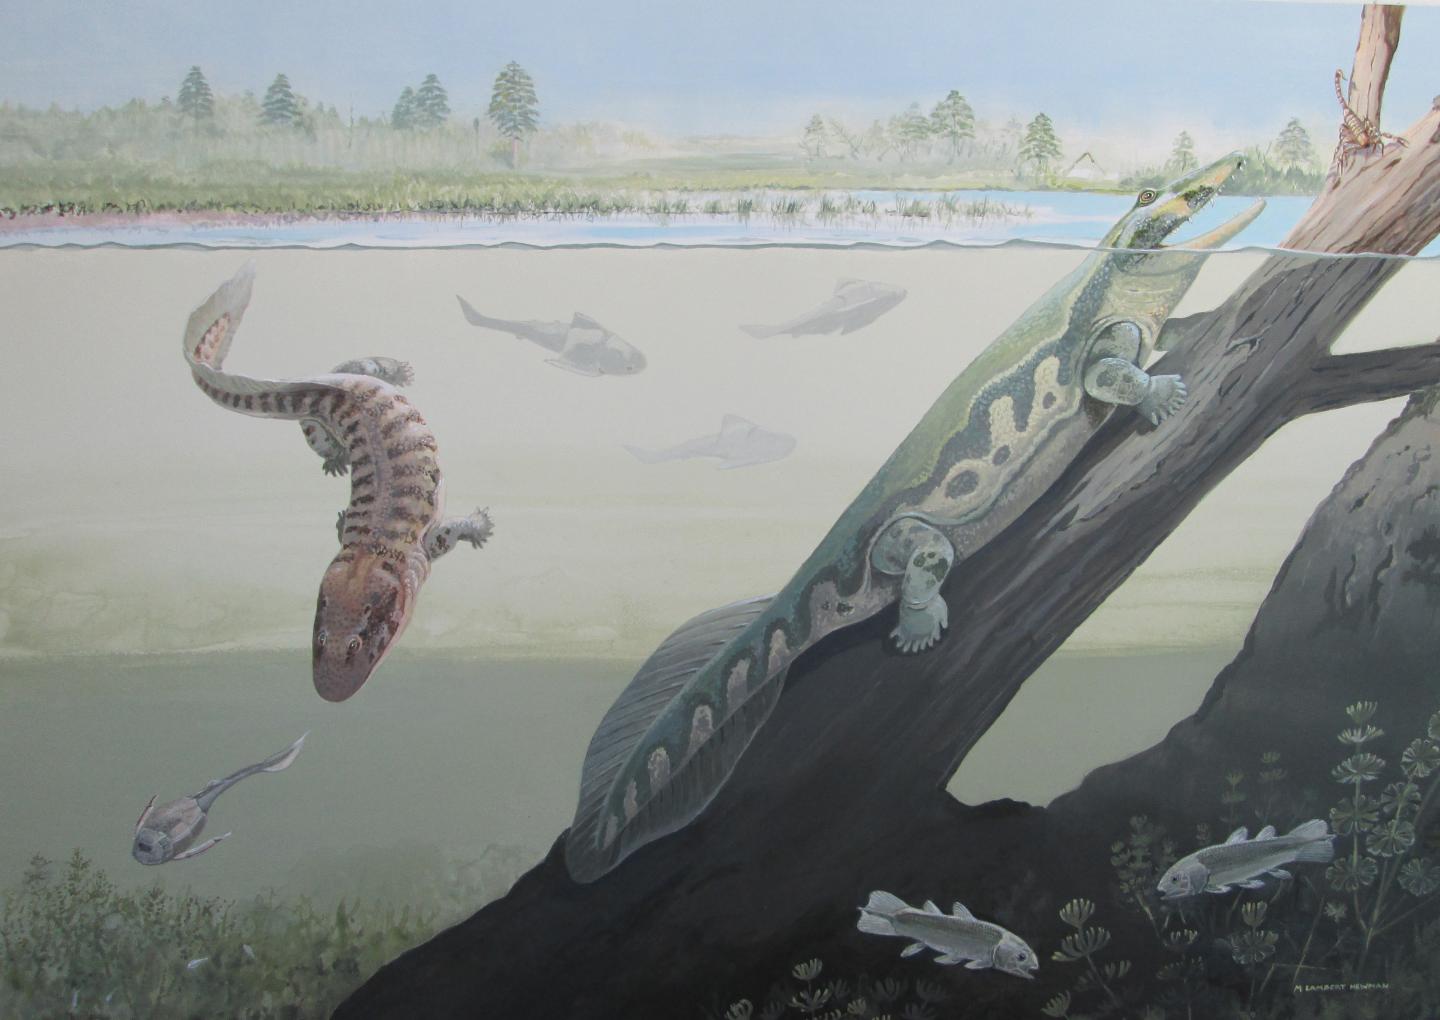 Shifting the Thinking on Tetrapod Evolution: Ancient Four-Limbed Animals Lived Near the Poles